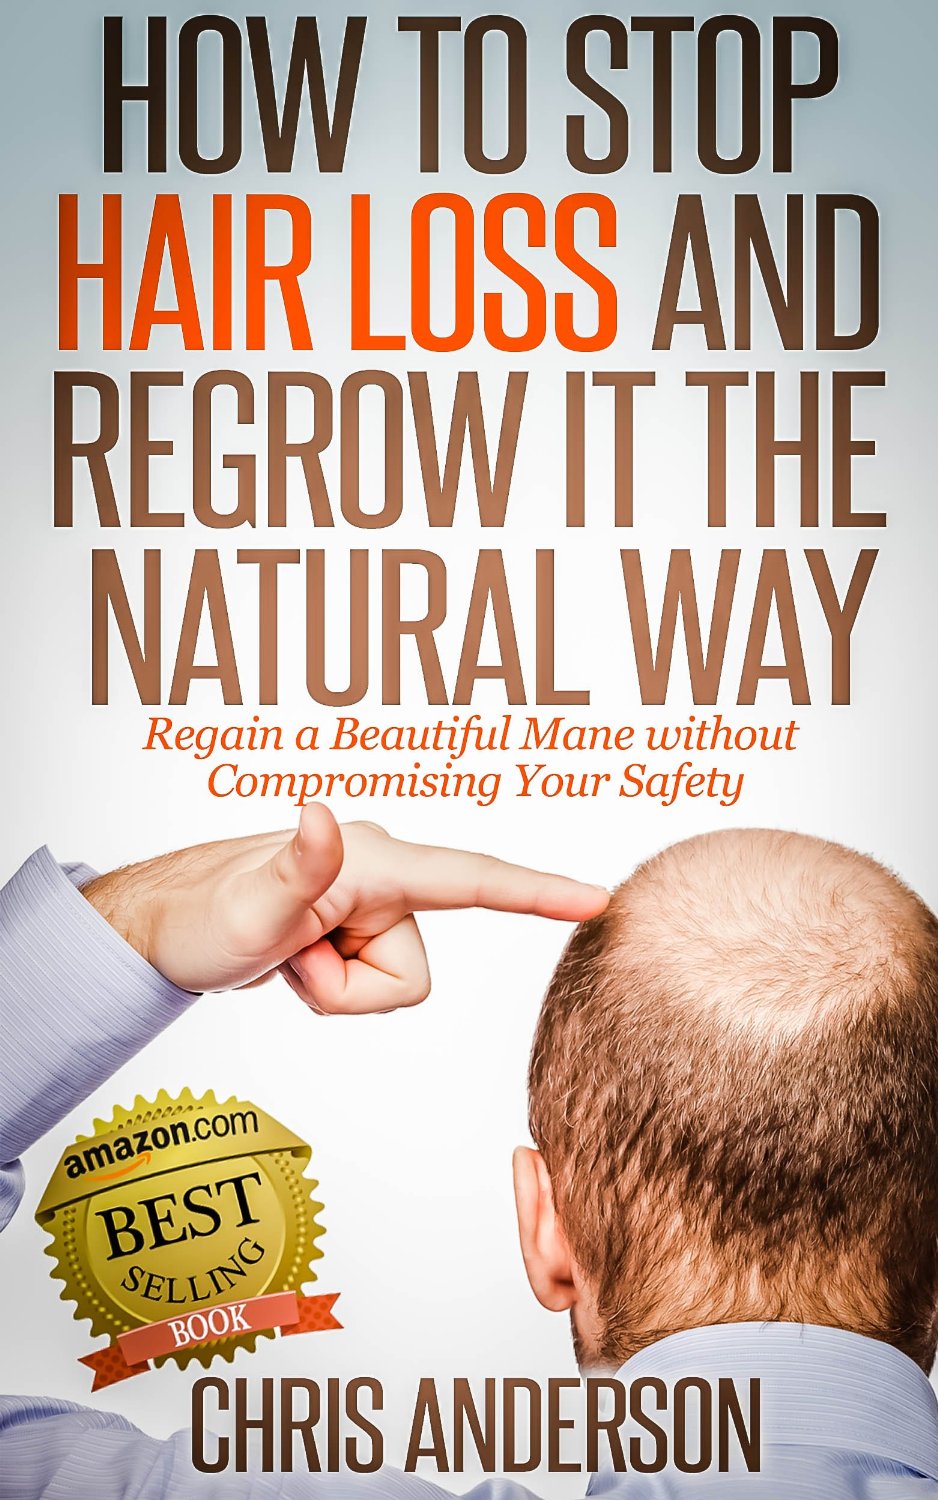 How to Stop Hair Loss and Regrow It the Natural Way: Regain a Beautiful Mane without Compromising Your Safety by Chris Anderson